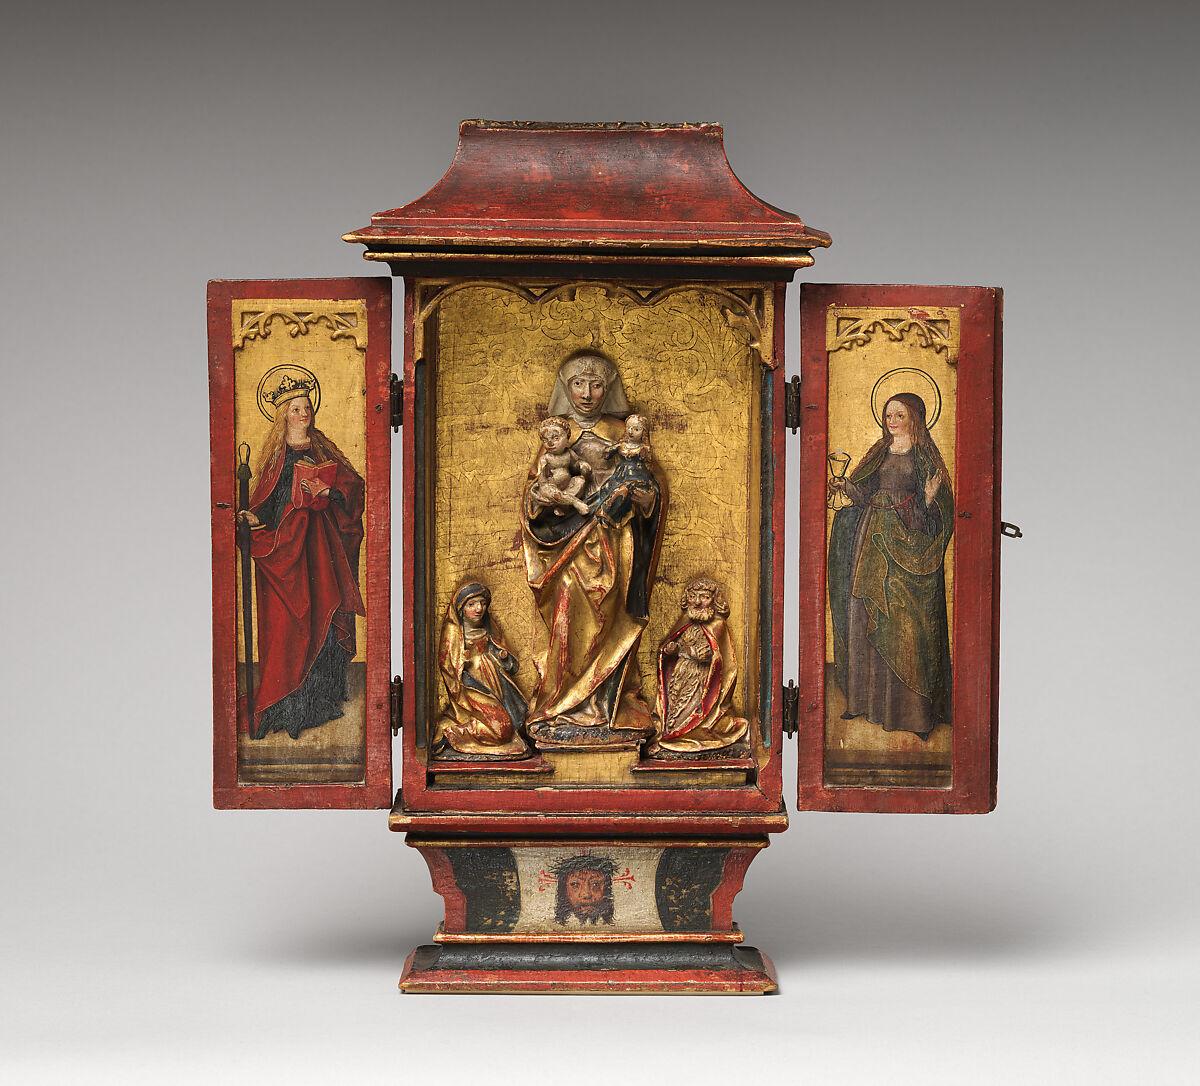 Private Devotional Shrine, Wood, paint, gold, translucent glazes, and metal fixtures, German 